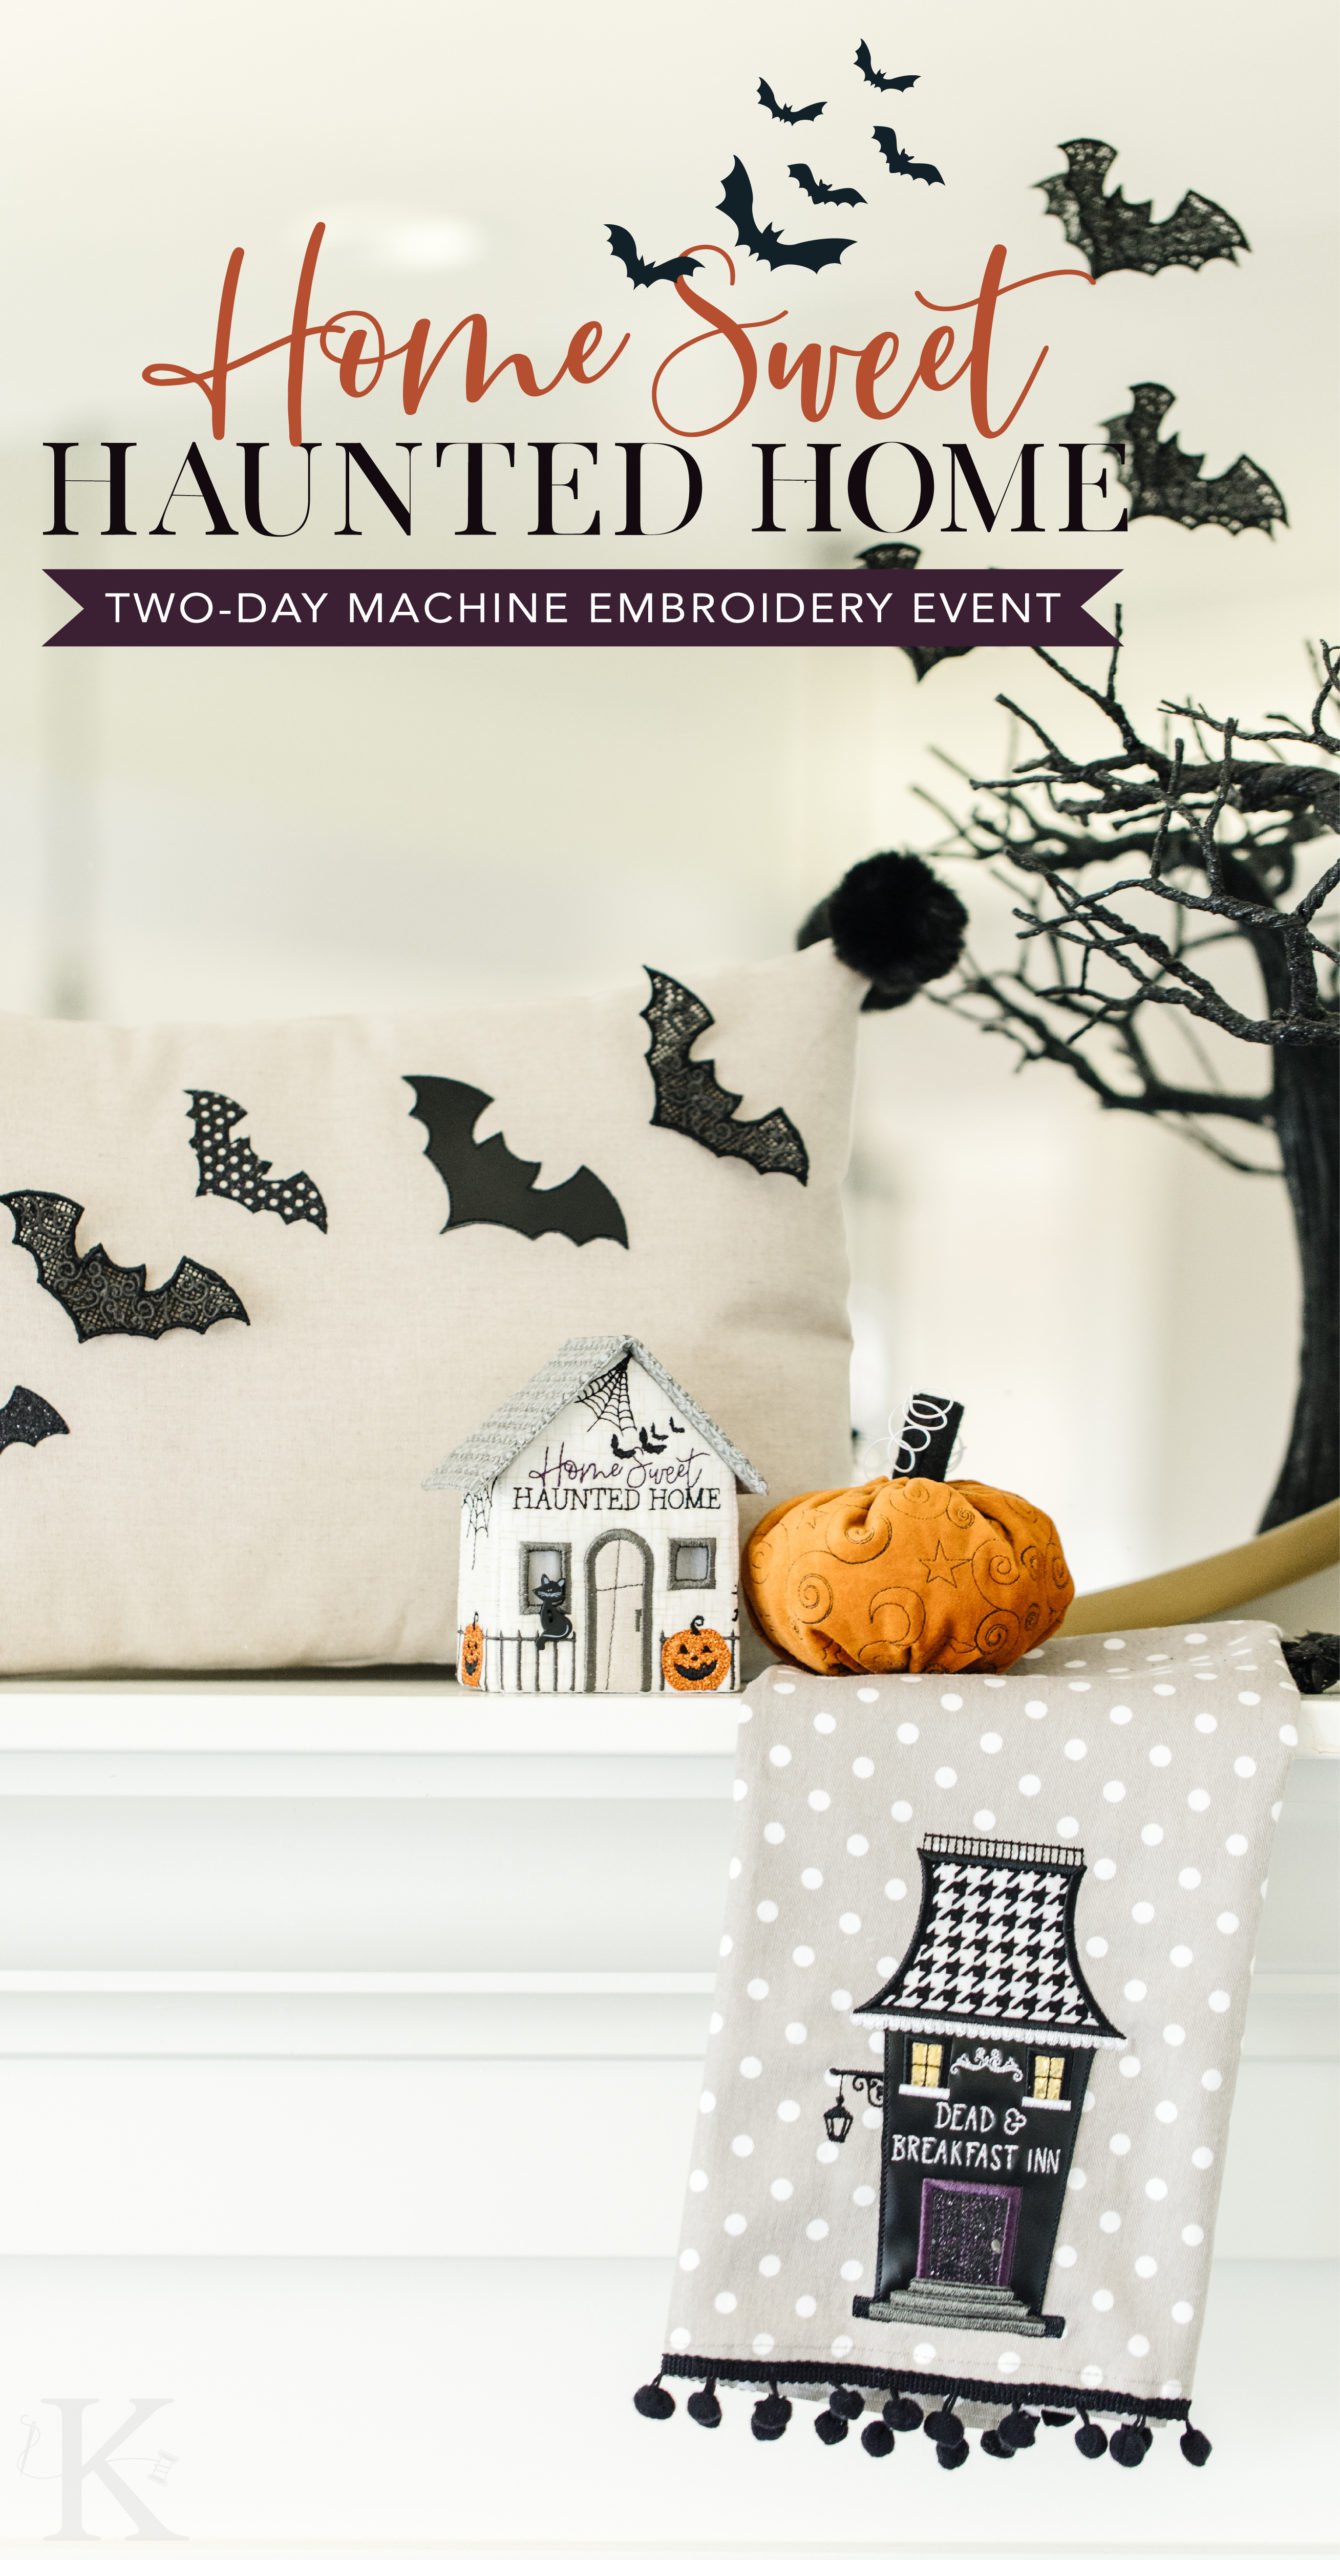 Home-Sweet-Haunted-Home-Social-Image-01-scaled